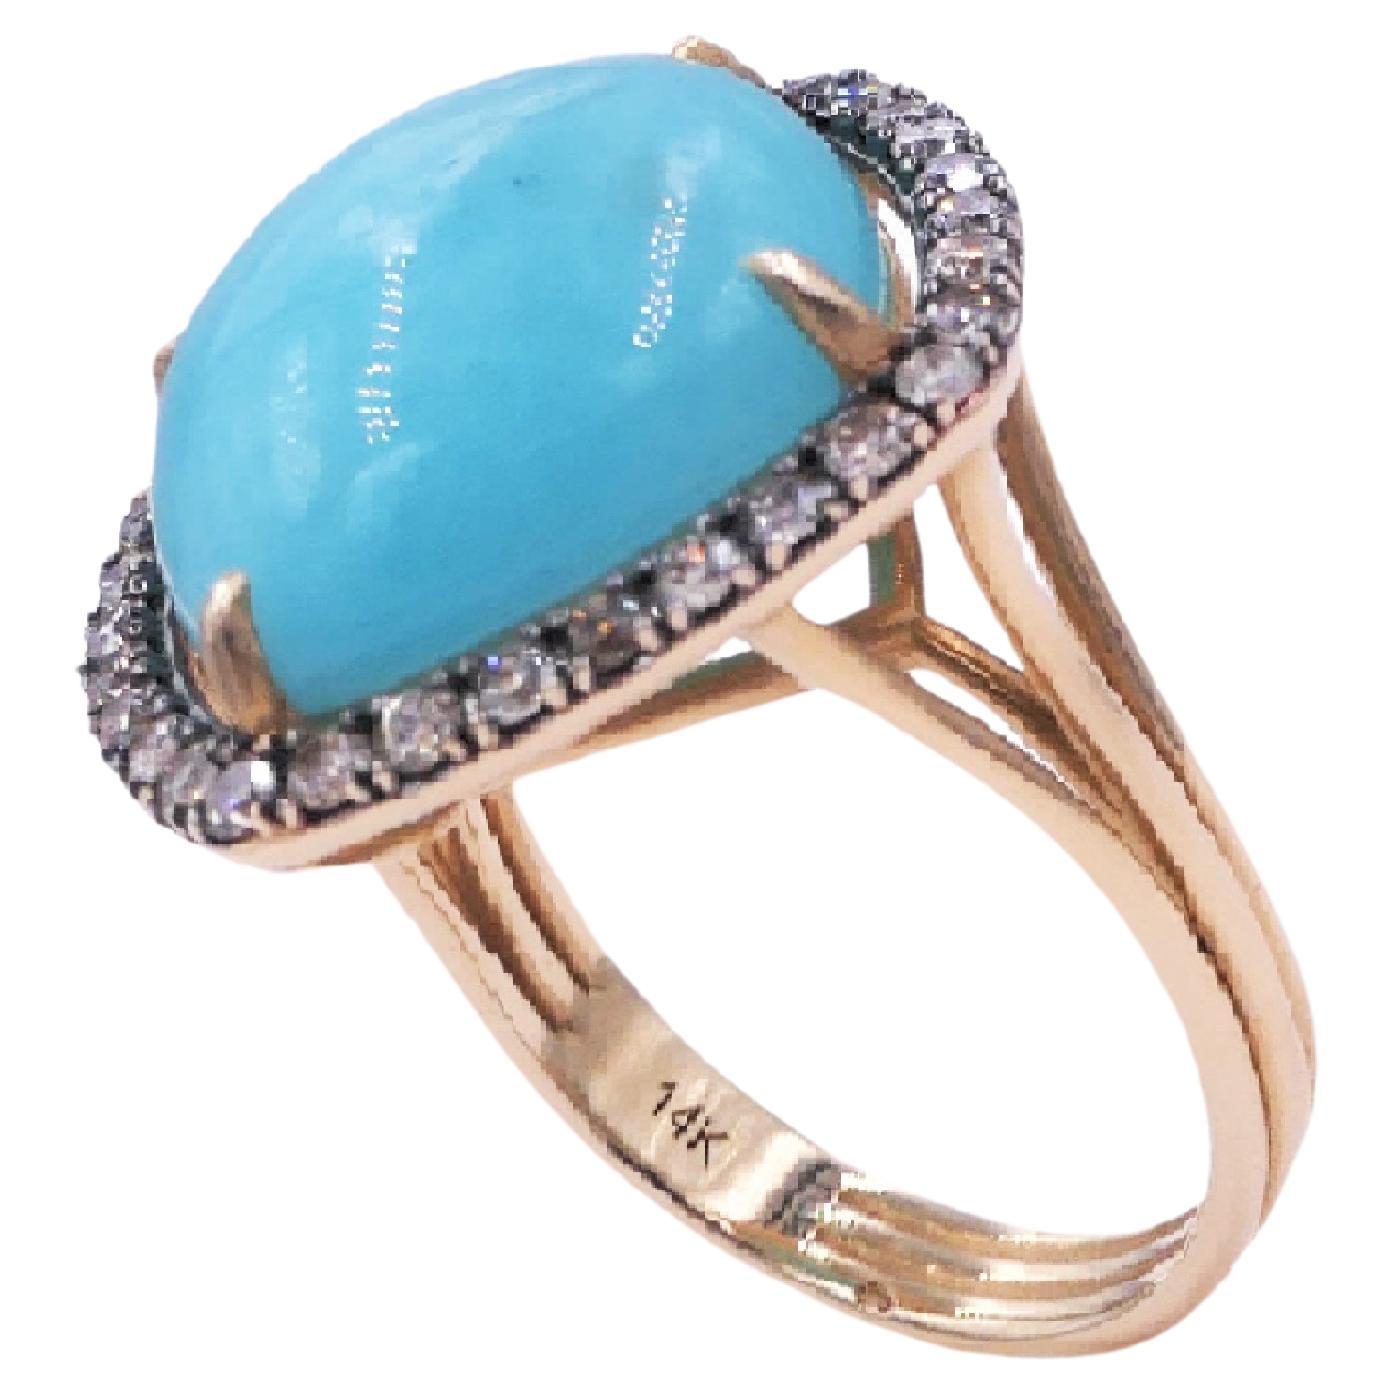 Turquoise Cushion Cabochon Silver Cognac Diamonds 14 Karat Yellow Halo Ring
14 Karat Yellow Gold
Turquoise Cushion Cabochon Gemstone
0.15 cts Diamonds
Size 7 - Resizable upon request 

Important Information:
Please note that this item will take 2-4